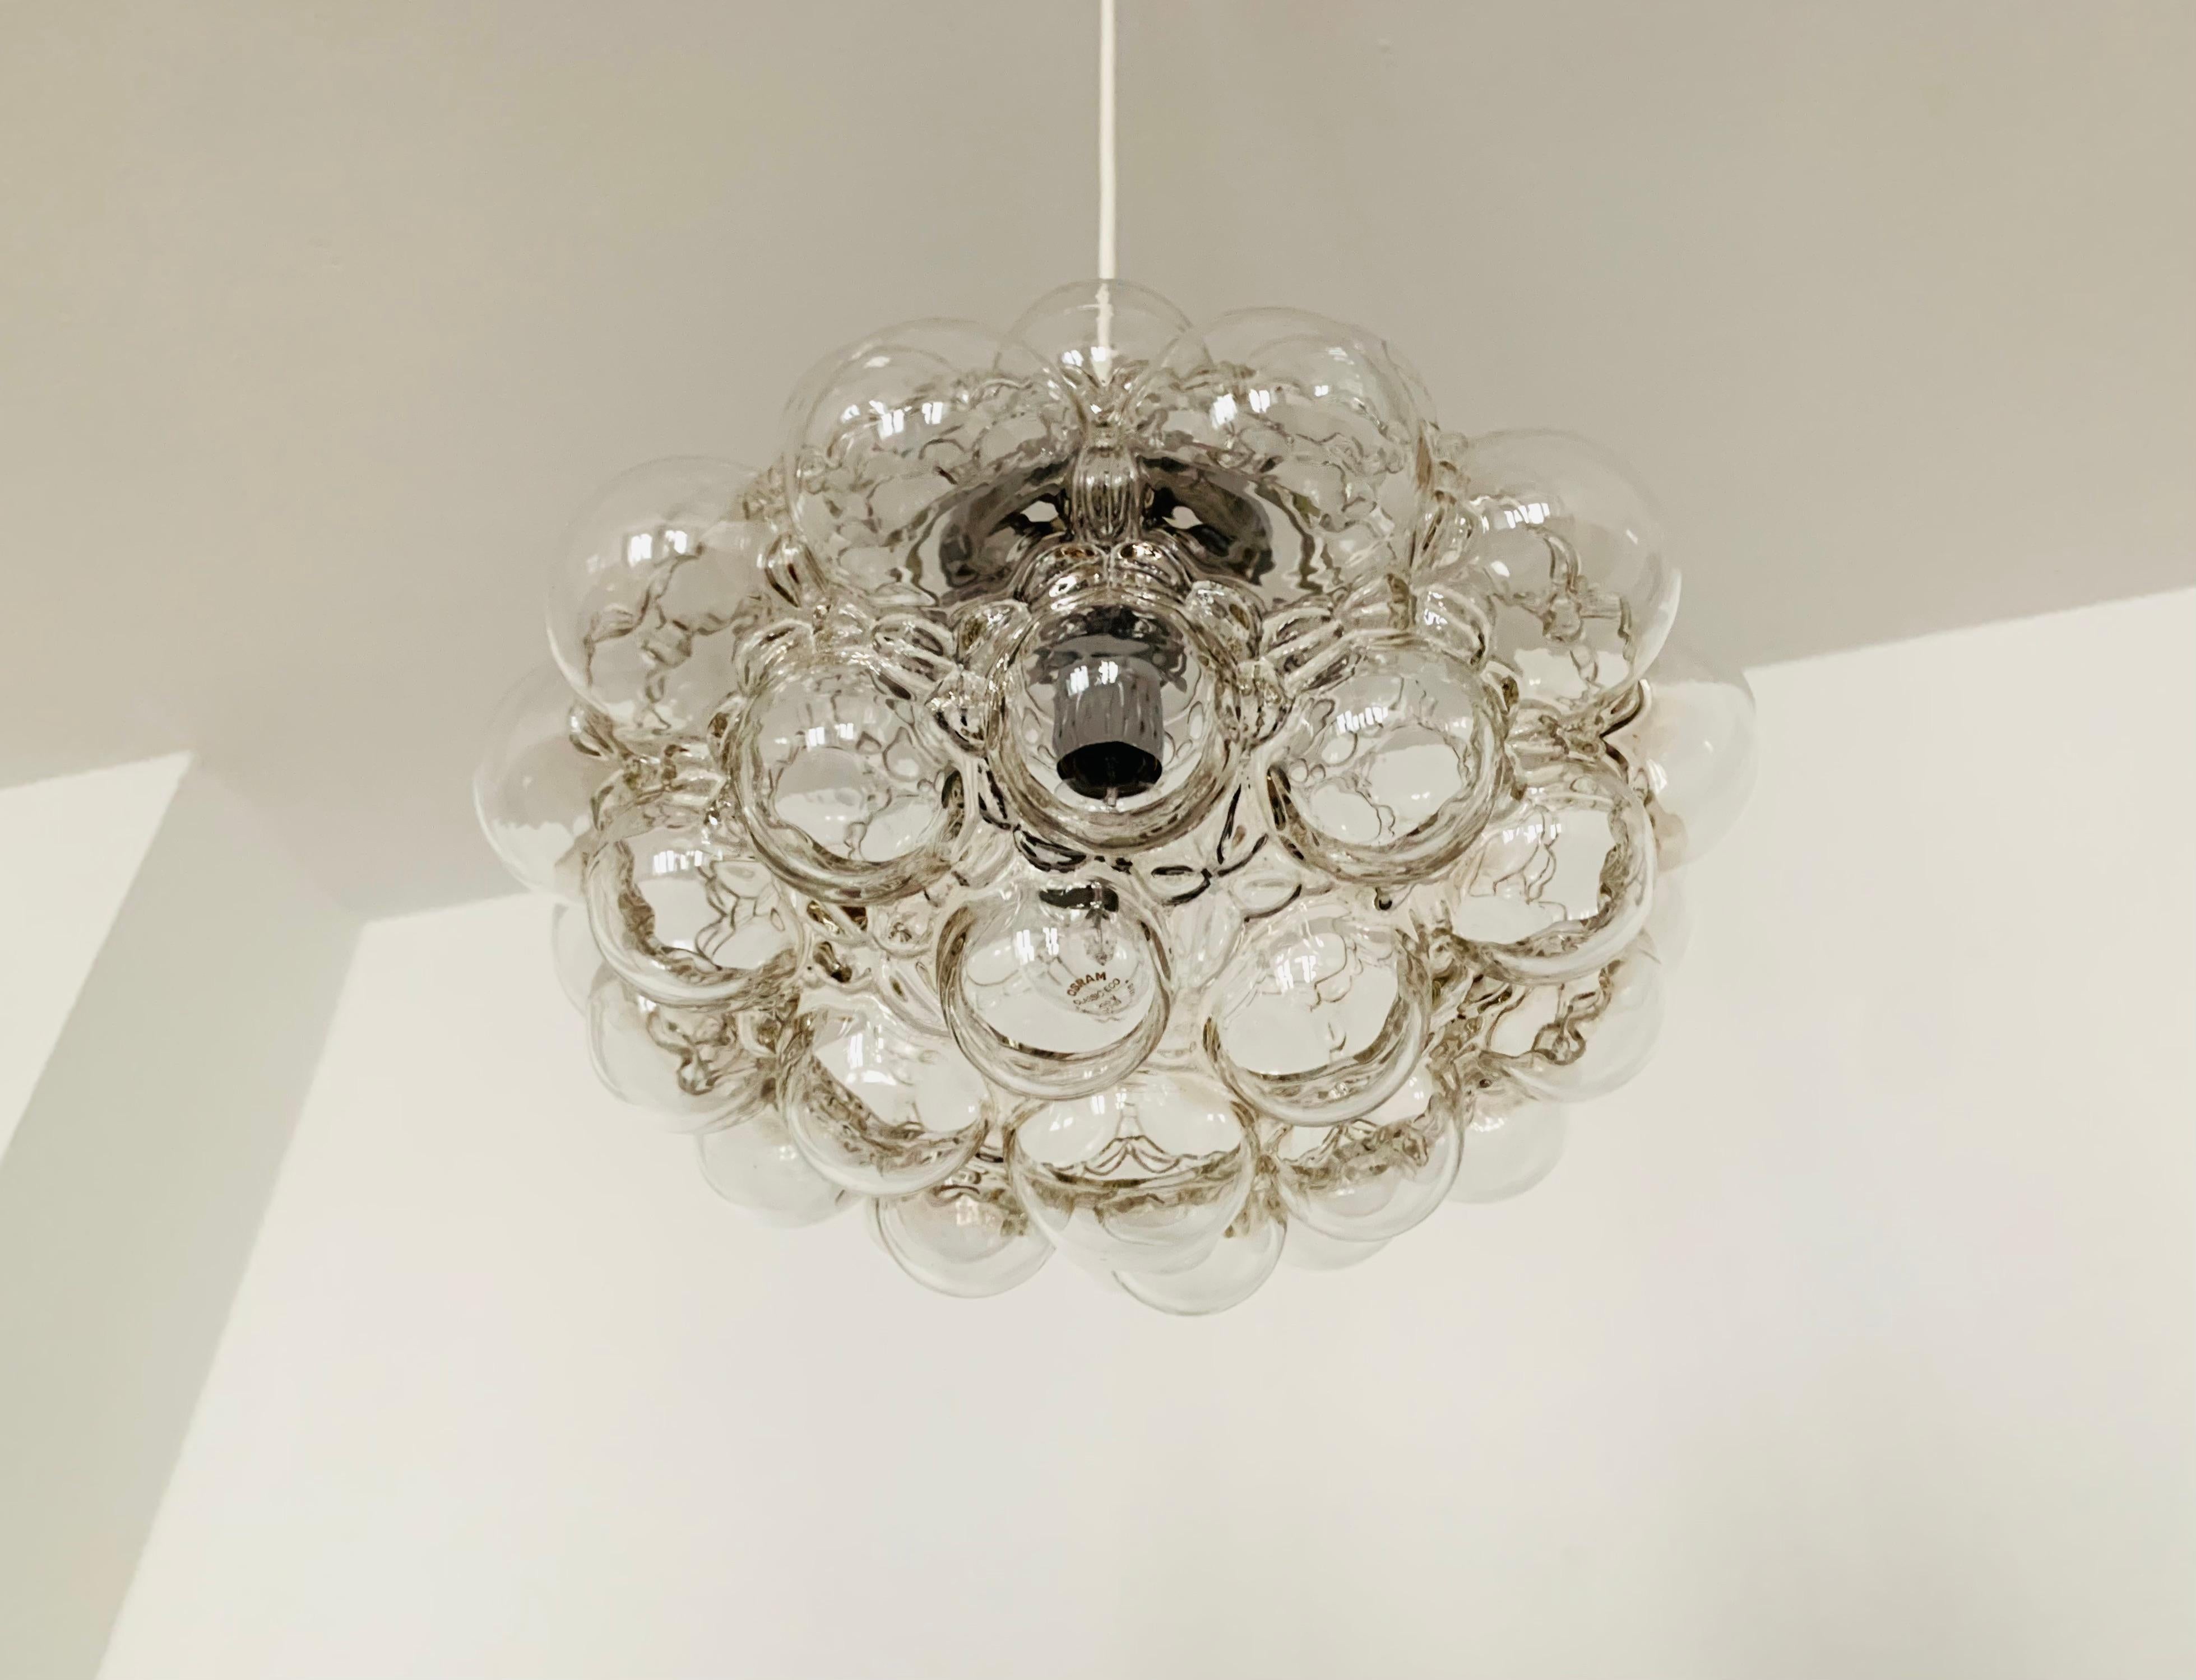 Very beautiful and very large bubble glass pendant lamp by Helena Tynell for the Limburg glassworks.
The lamp spreads a spectacular play of light in the room and enchants with its charisma.
Great high-quality workmanship and extraordinary